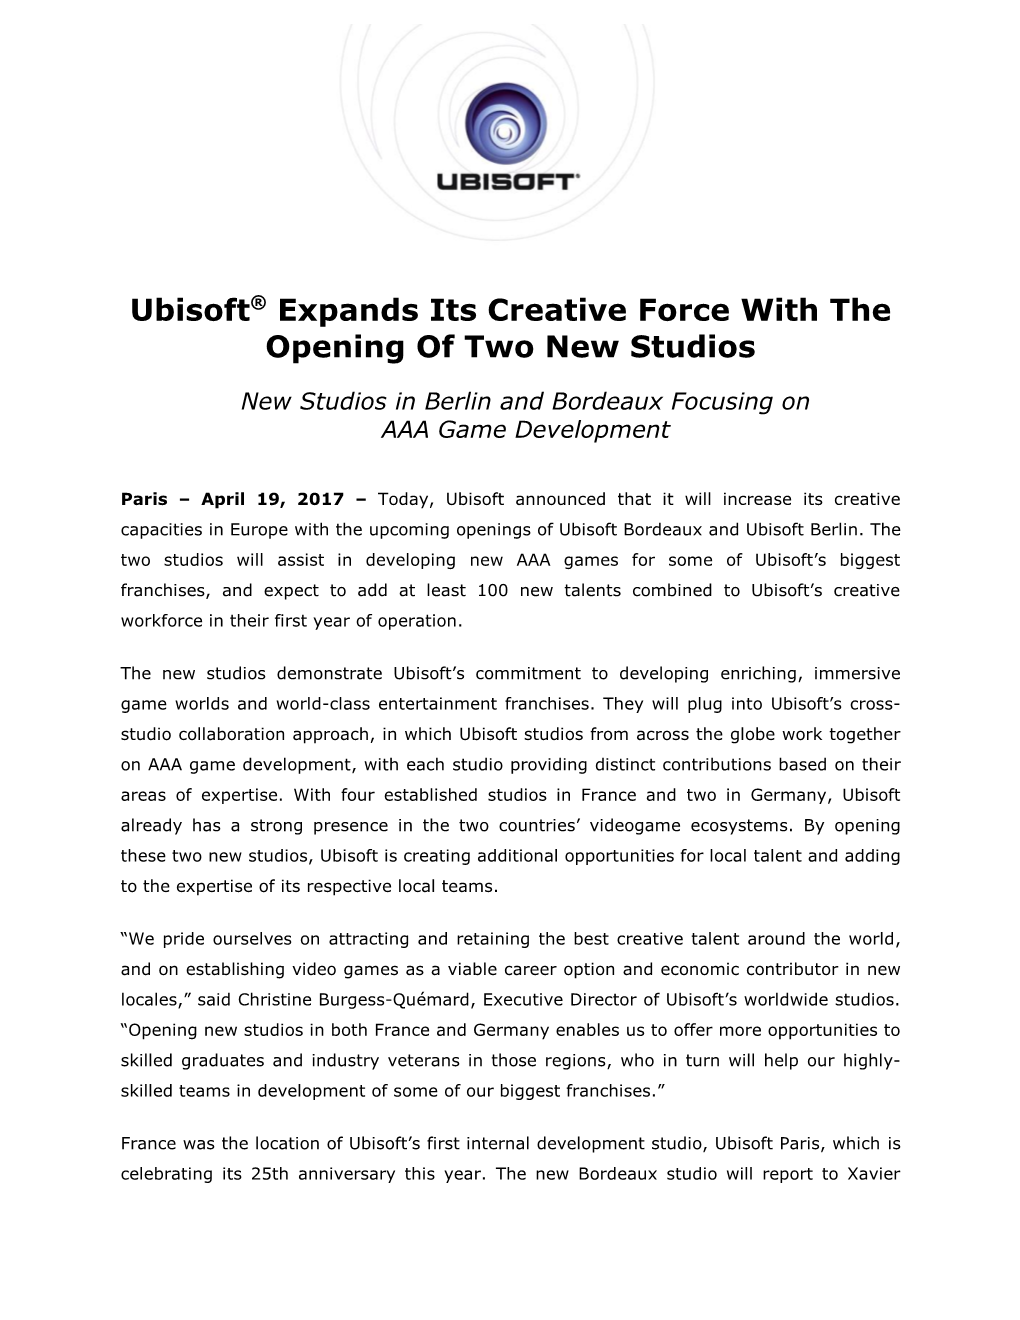 Ubisoft® Expands Its Creative Force with the Opening of Two New Studios